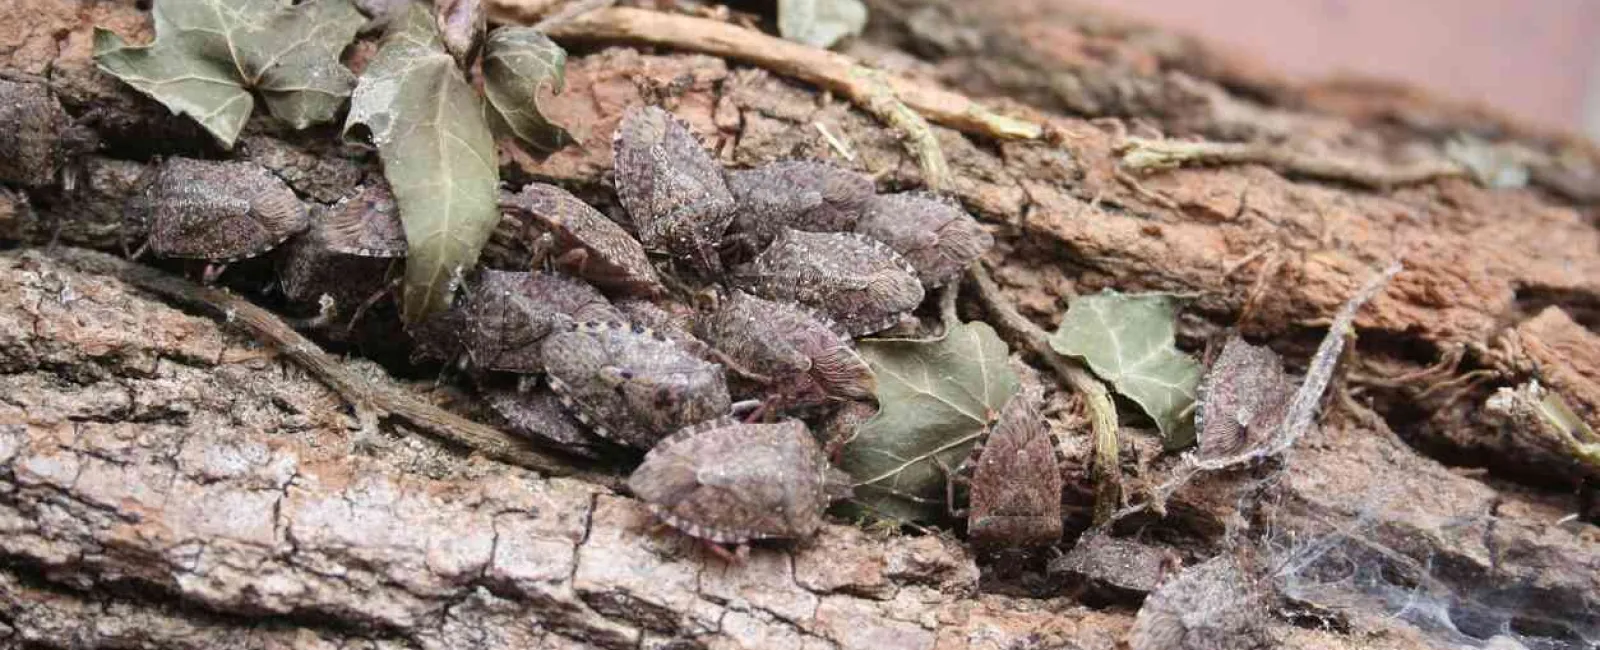 a group of stink bugs